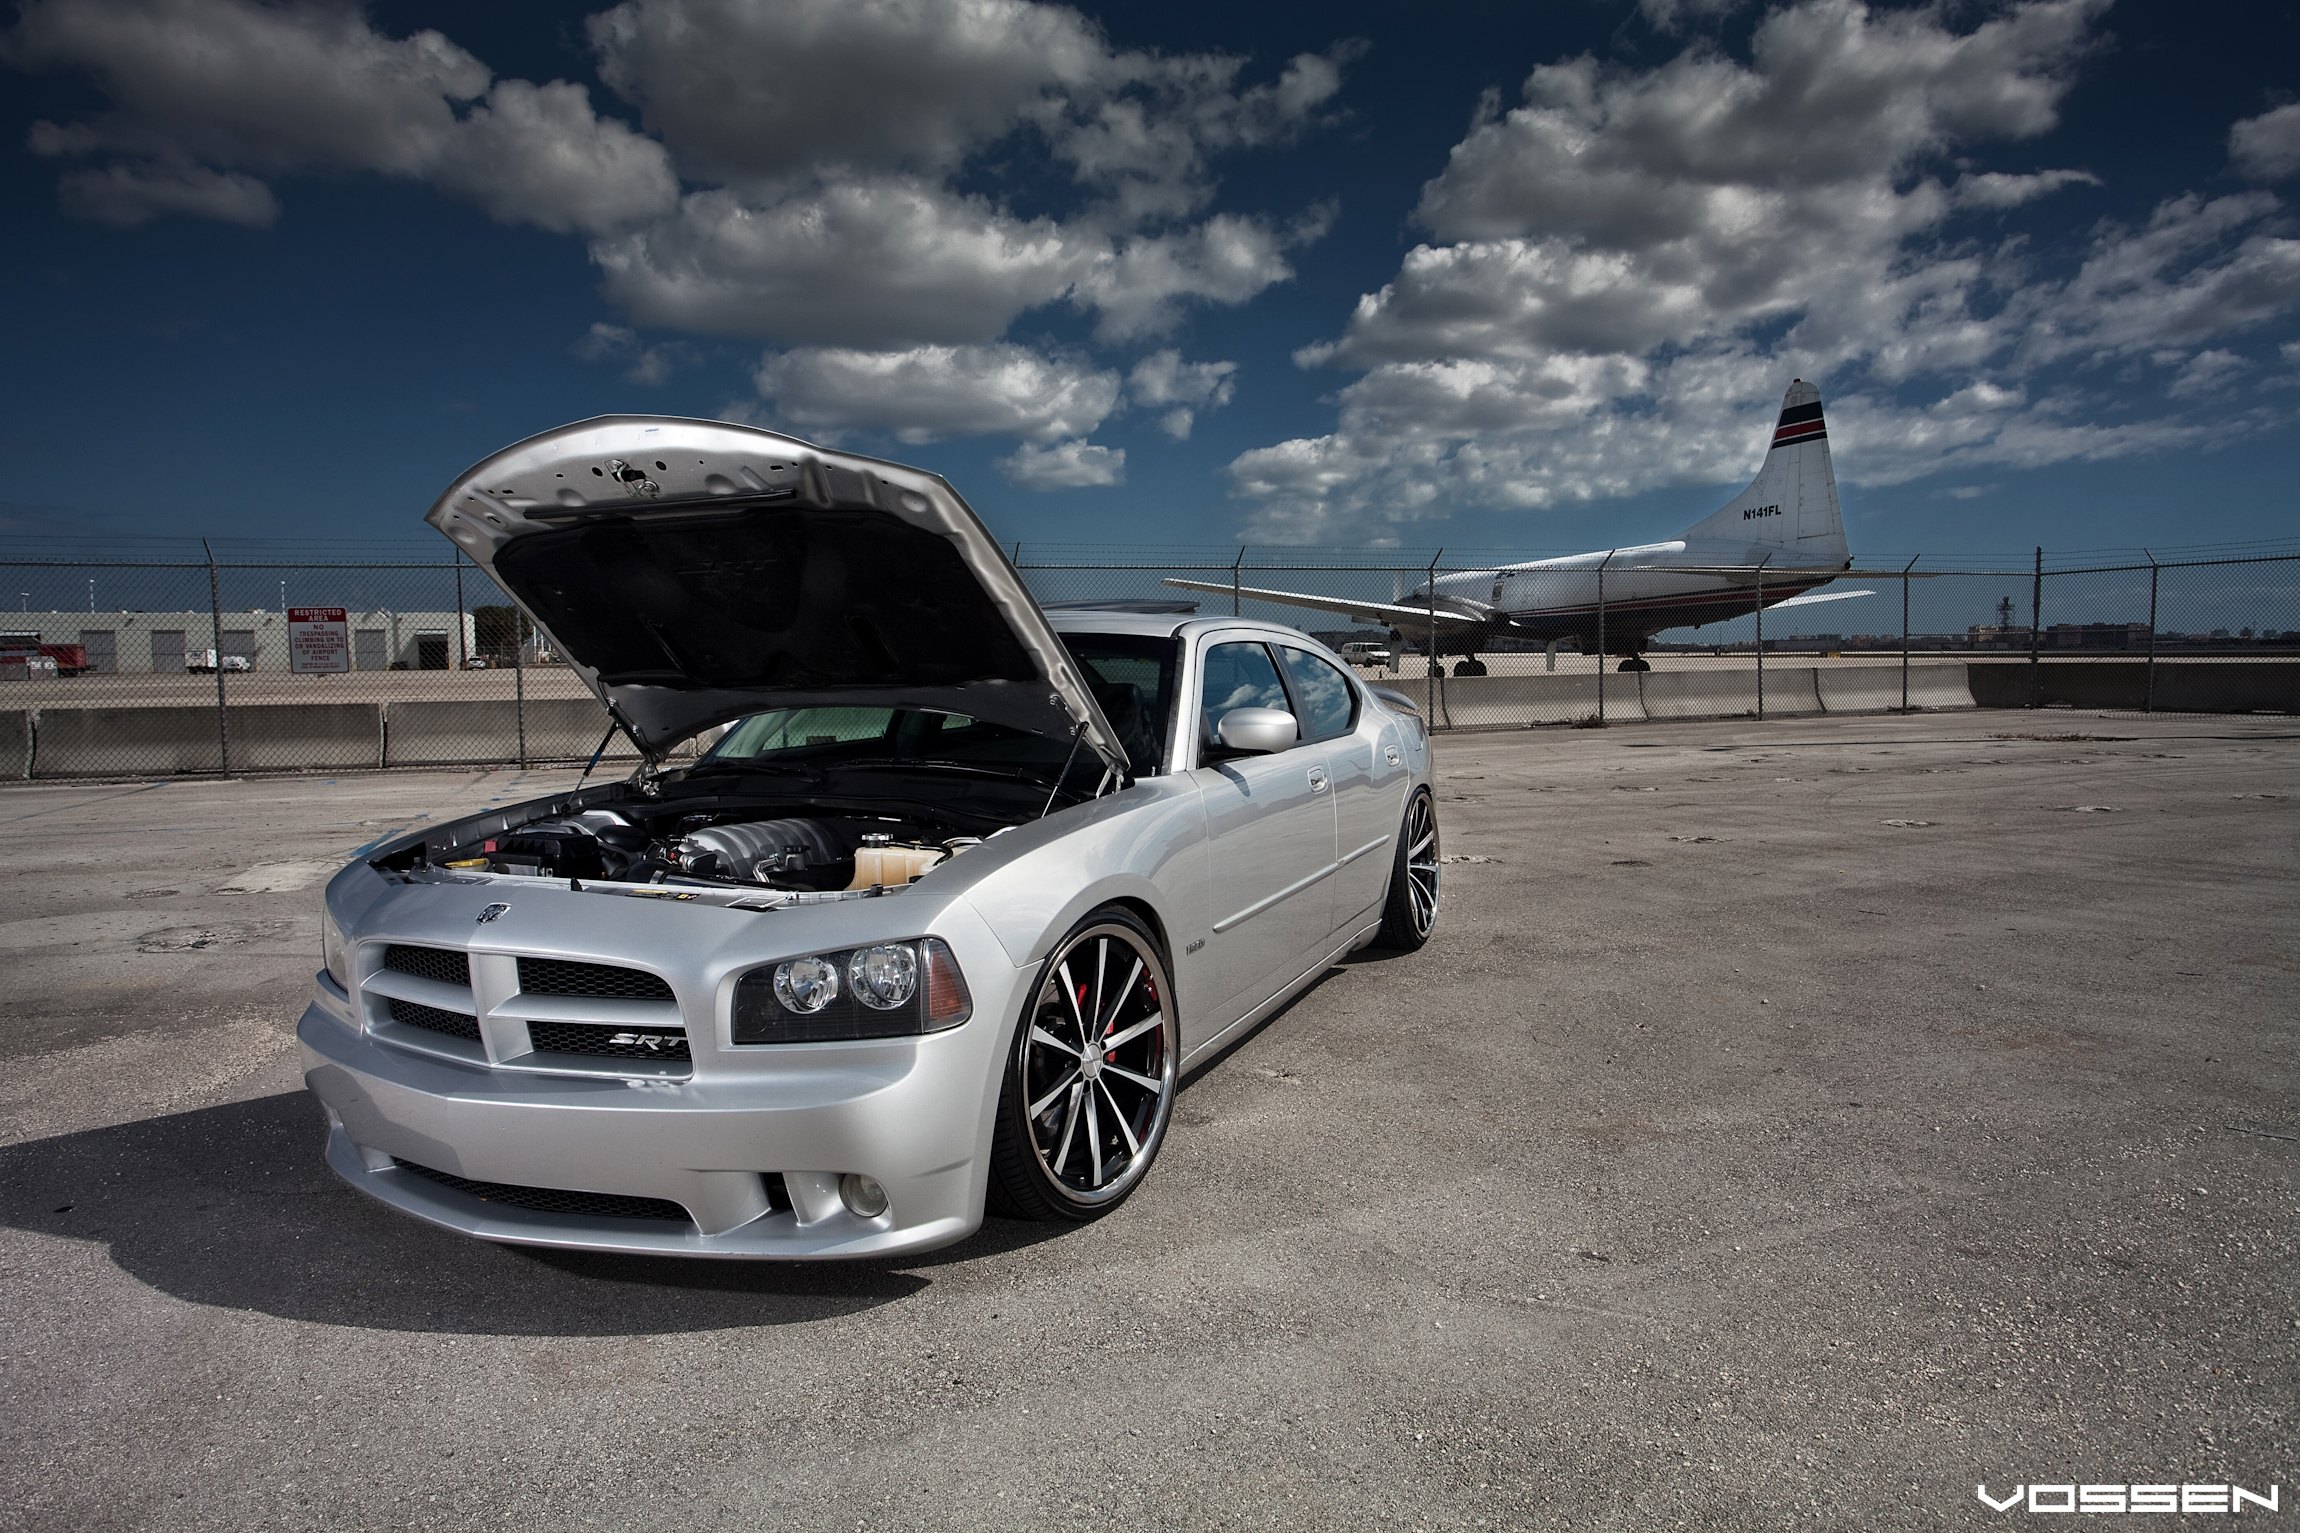 Custom Supercharged Silver Dodge Charger SRT - Photo by Vossen